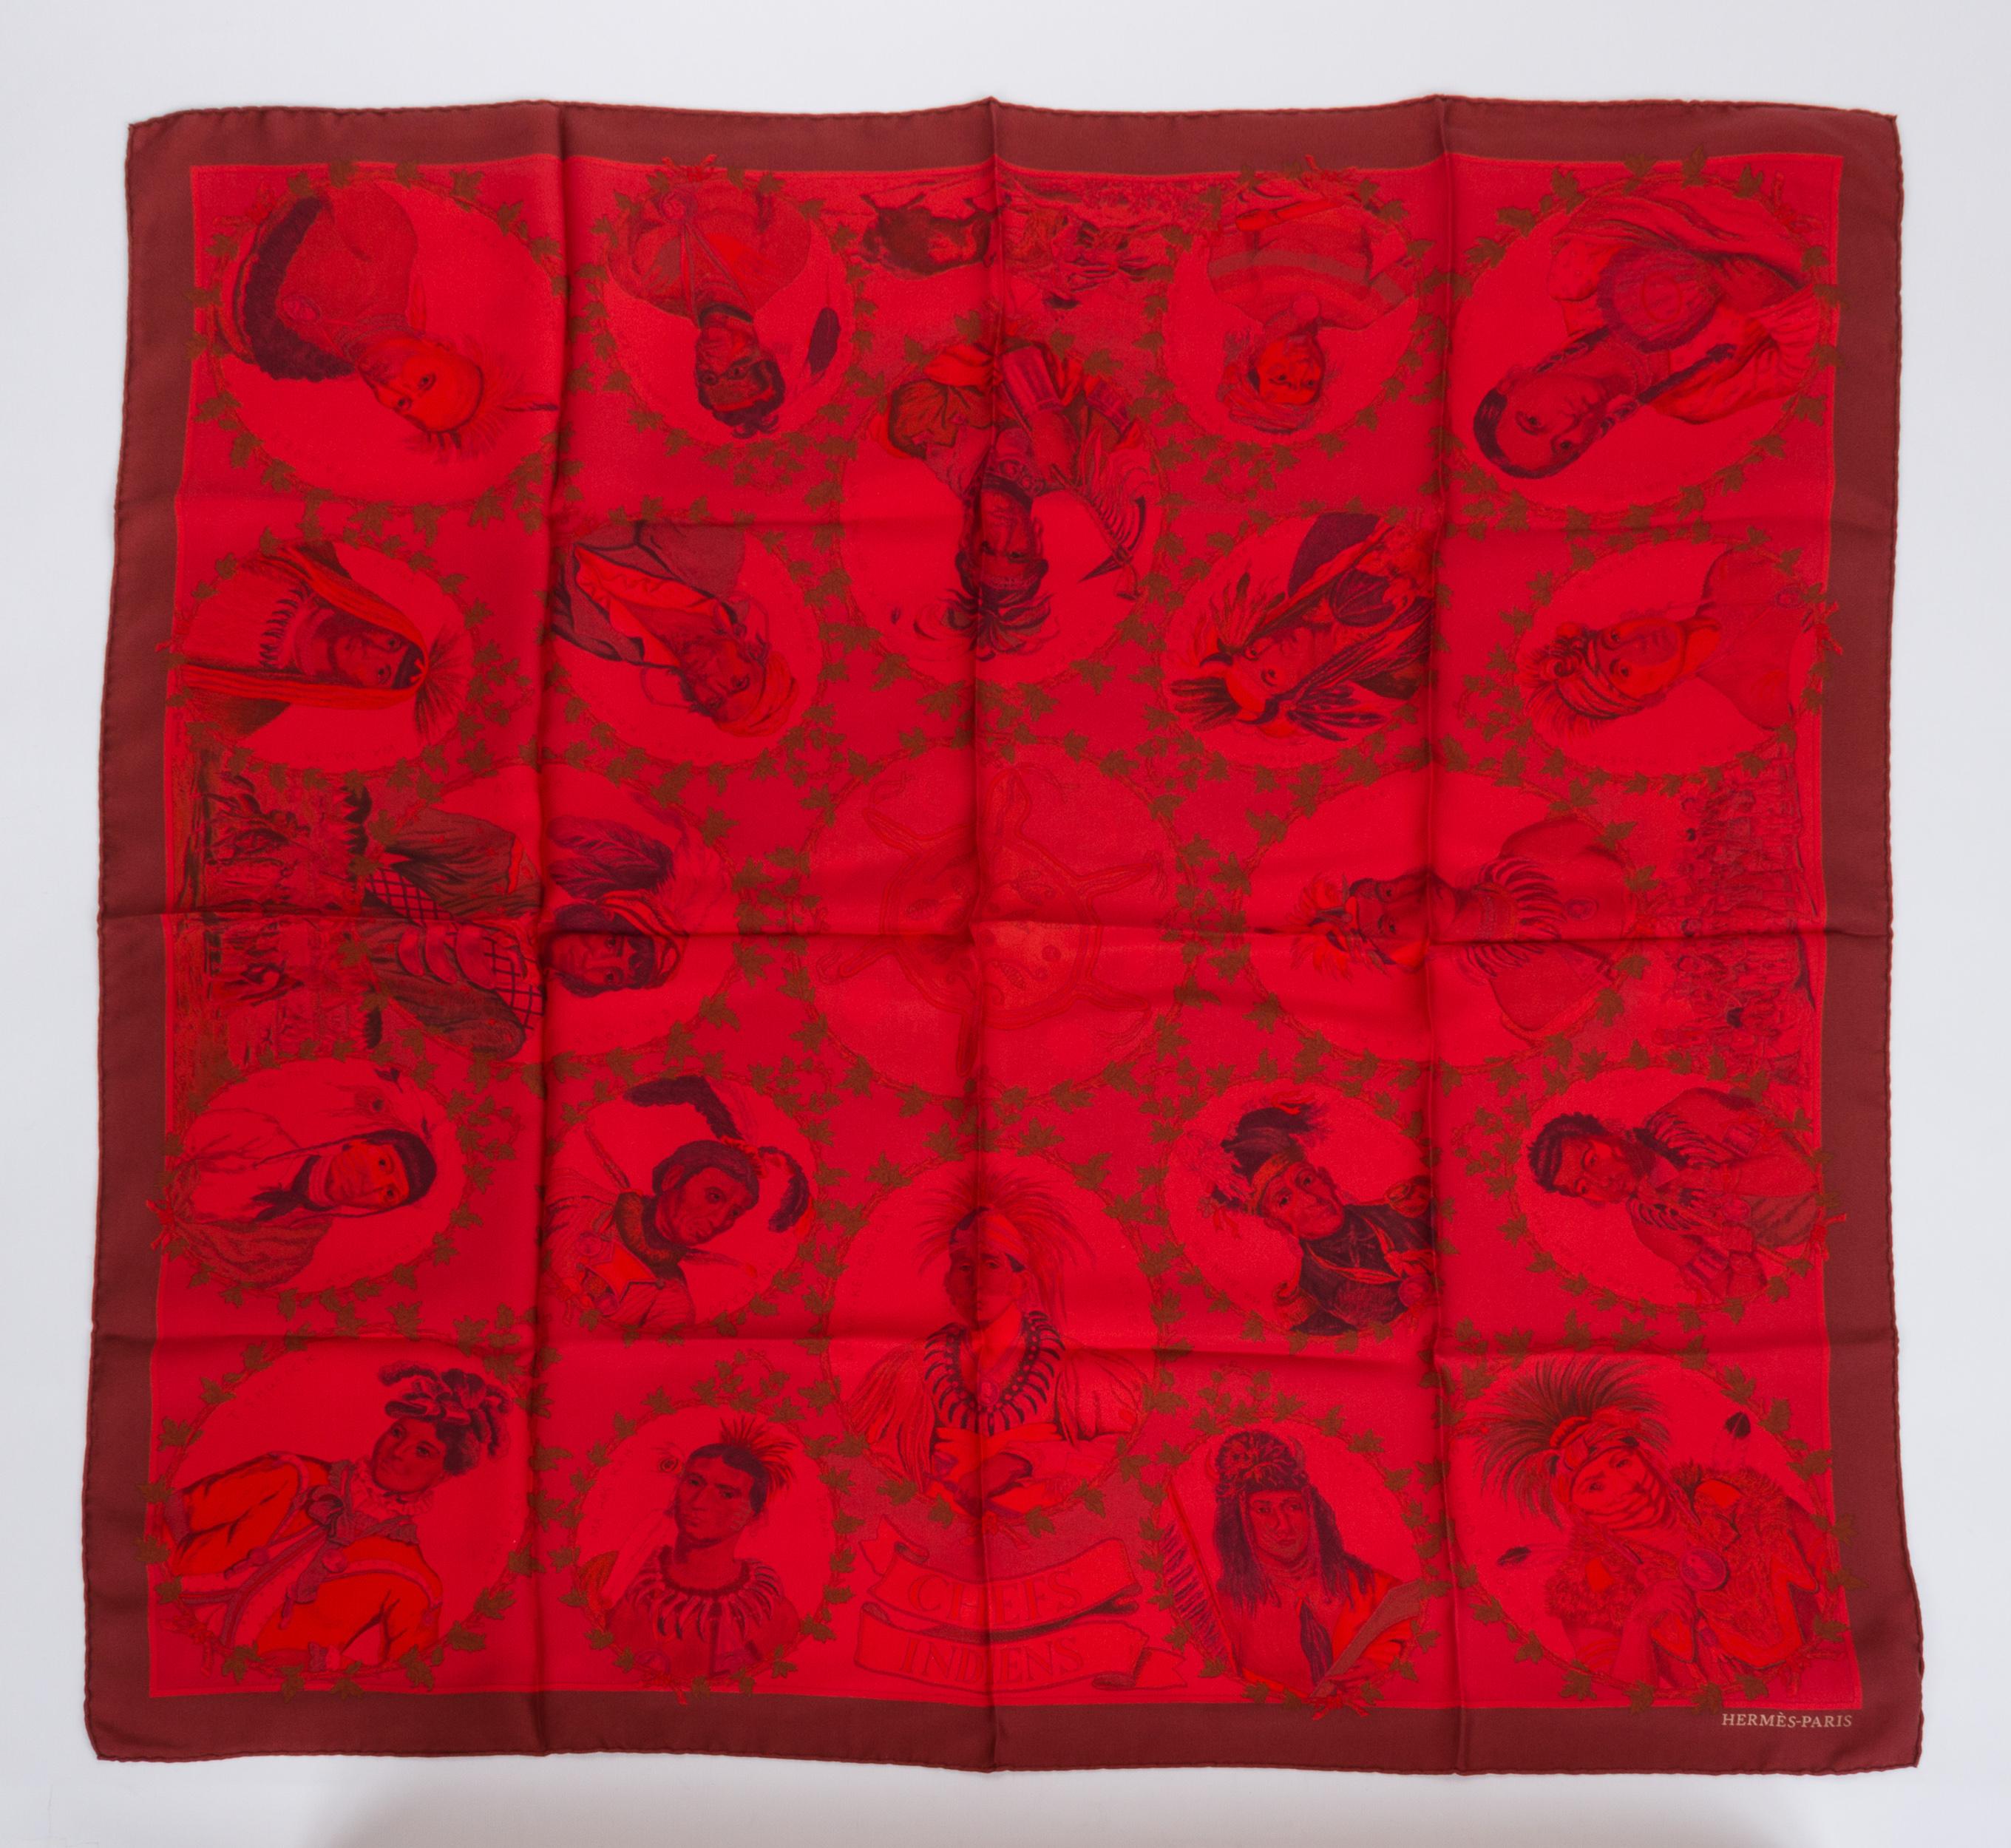 early hermes scarves were dyed using what